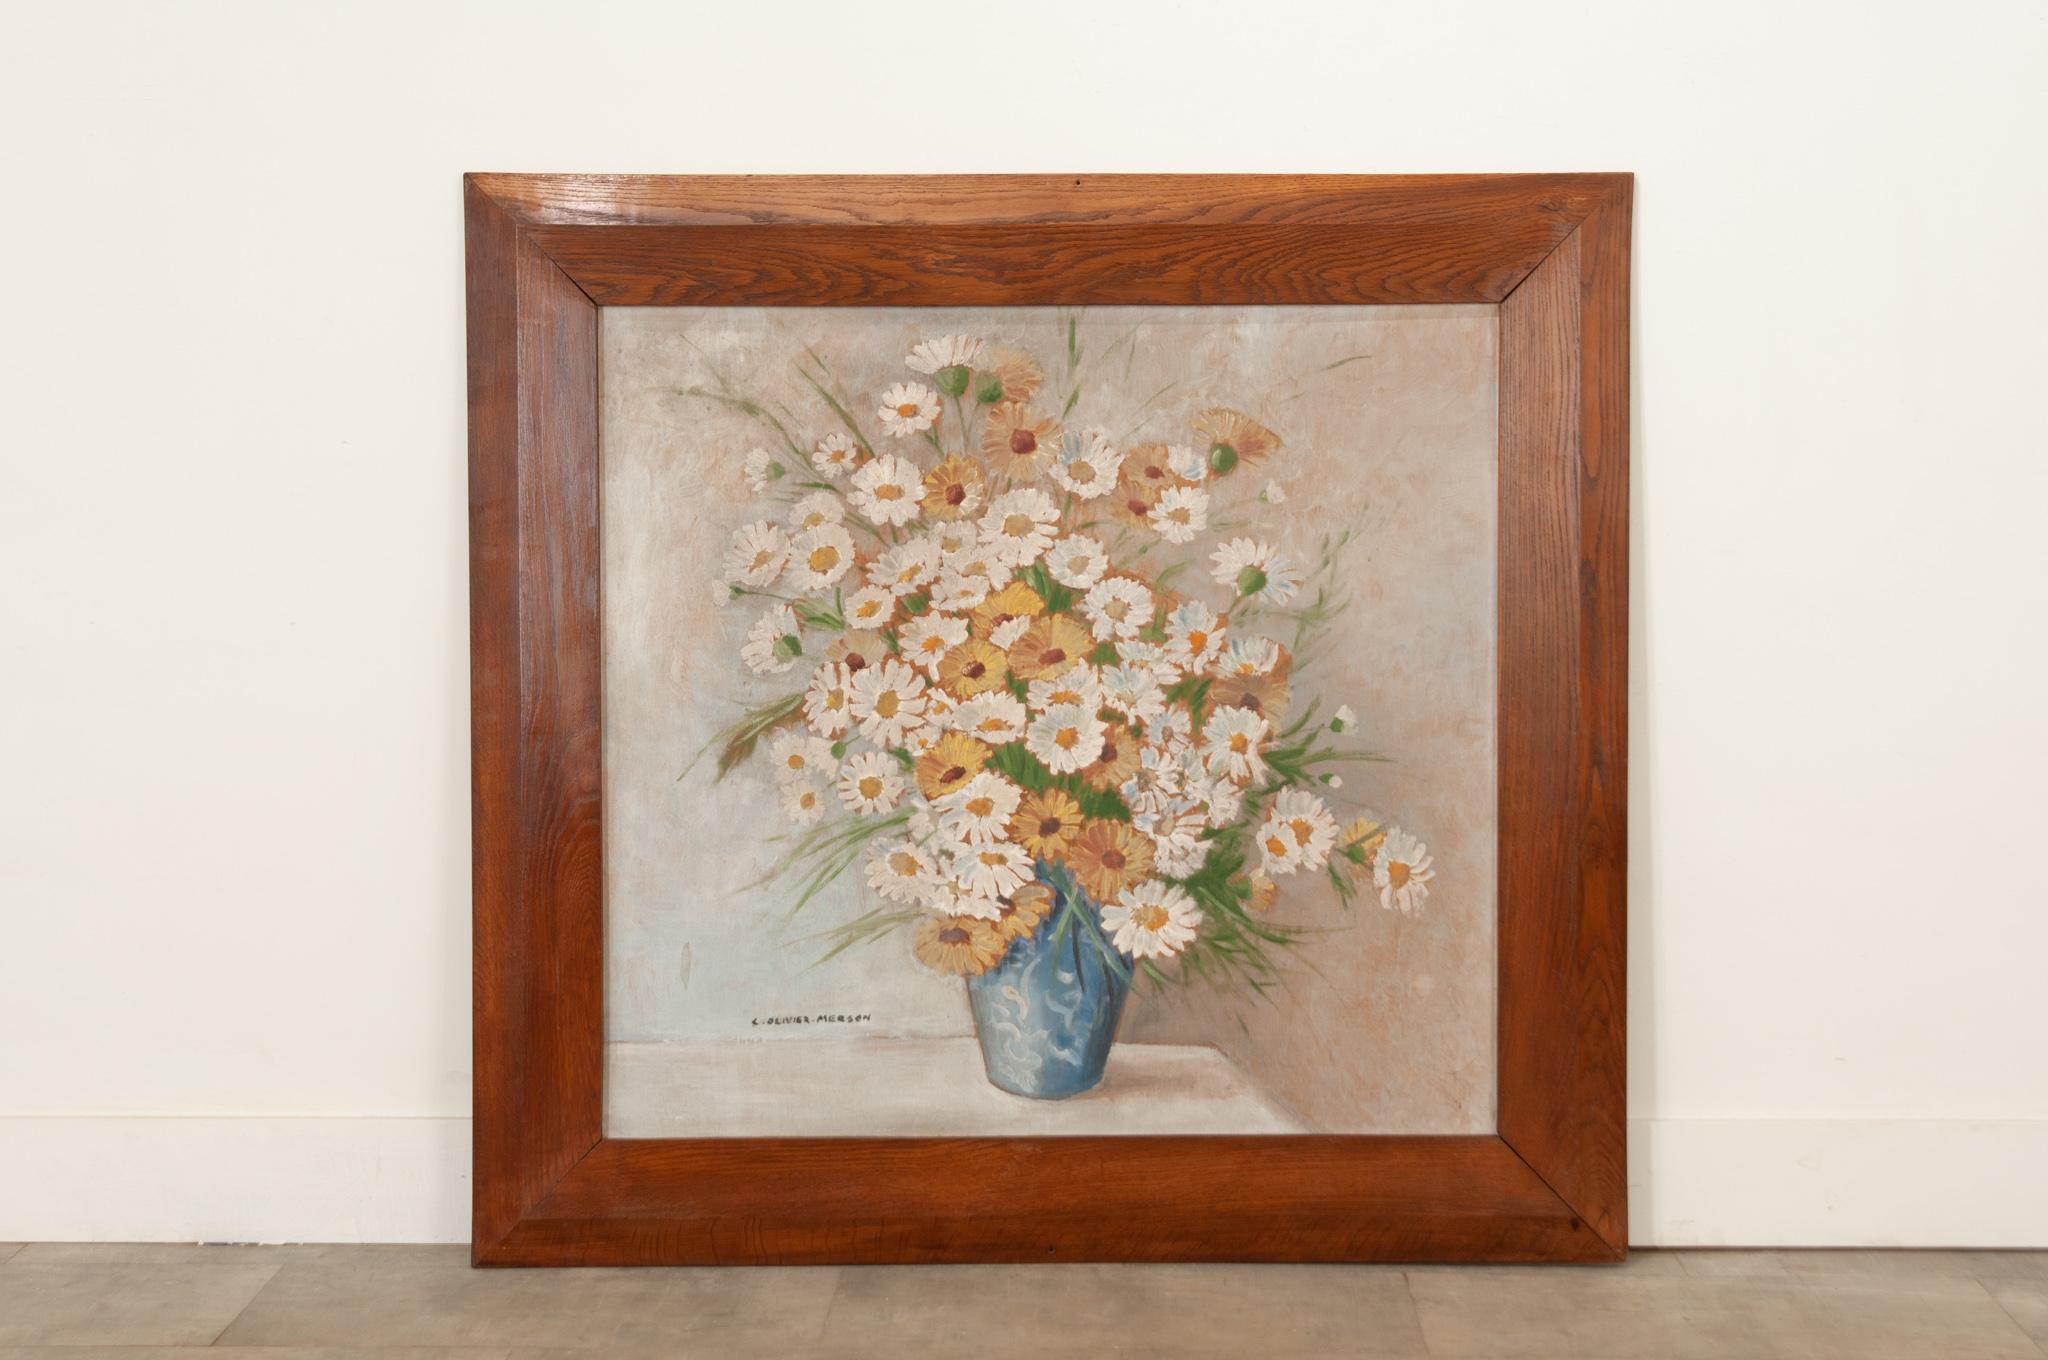 A lovely and large floral painting from France. Signed by the Artist C. Olivier-Merson. Framed in a large solid oak frame. Make sure to view all of the images for a closer look at the details.